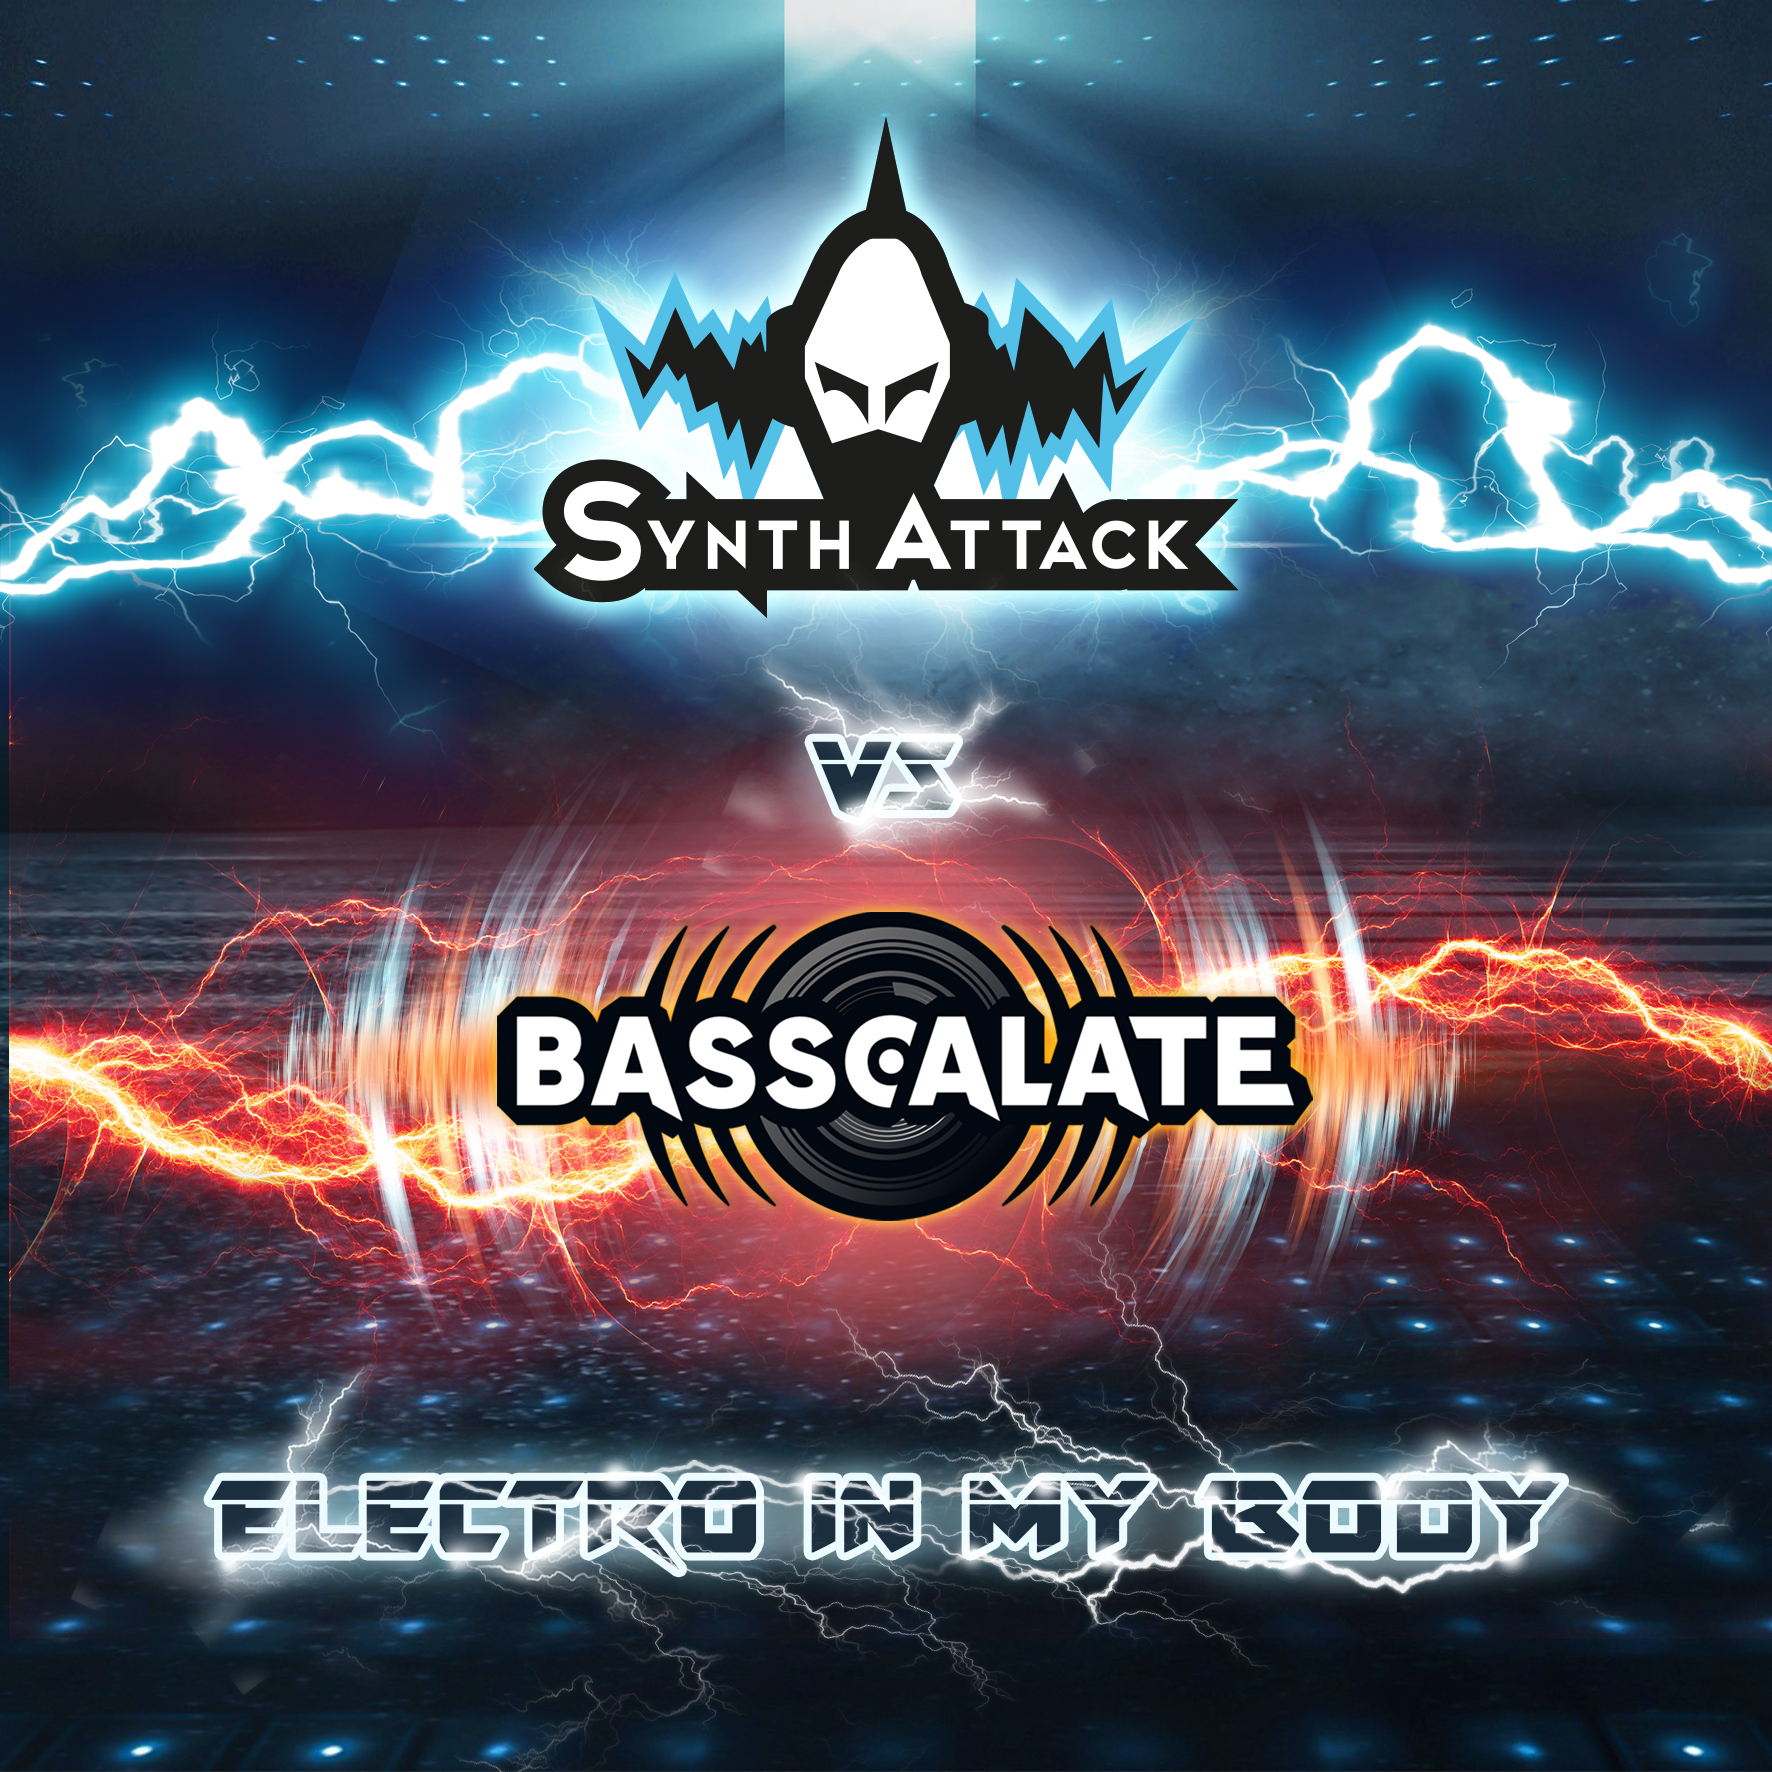 SYNTHATTACK vs BASCALATE